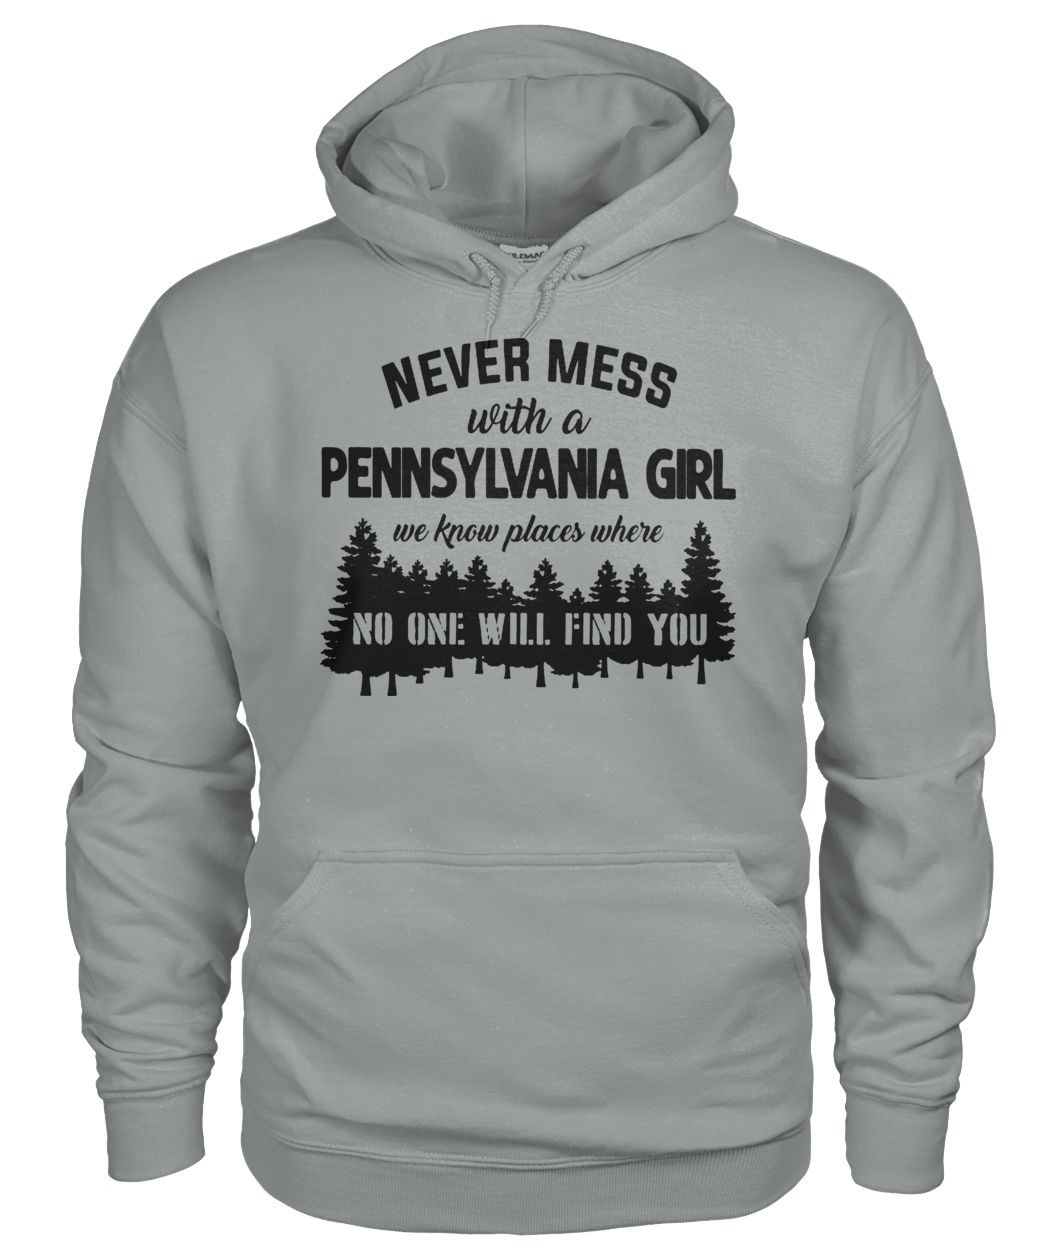 Never mess with a pennsylvania girl we know places where no one will find you gildan hoodie